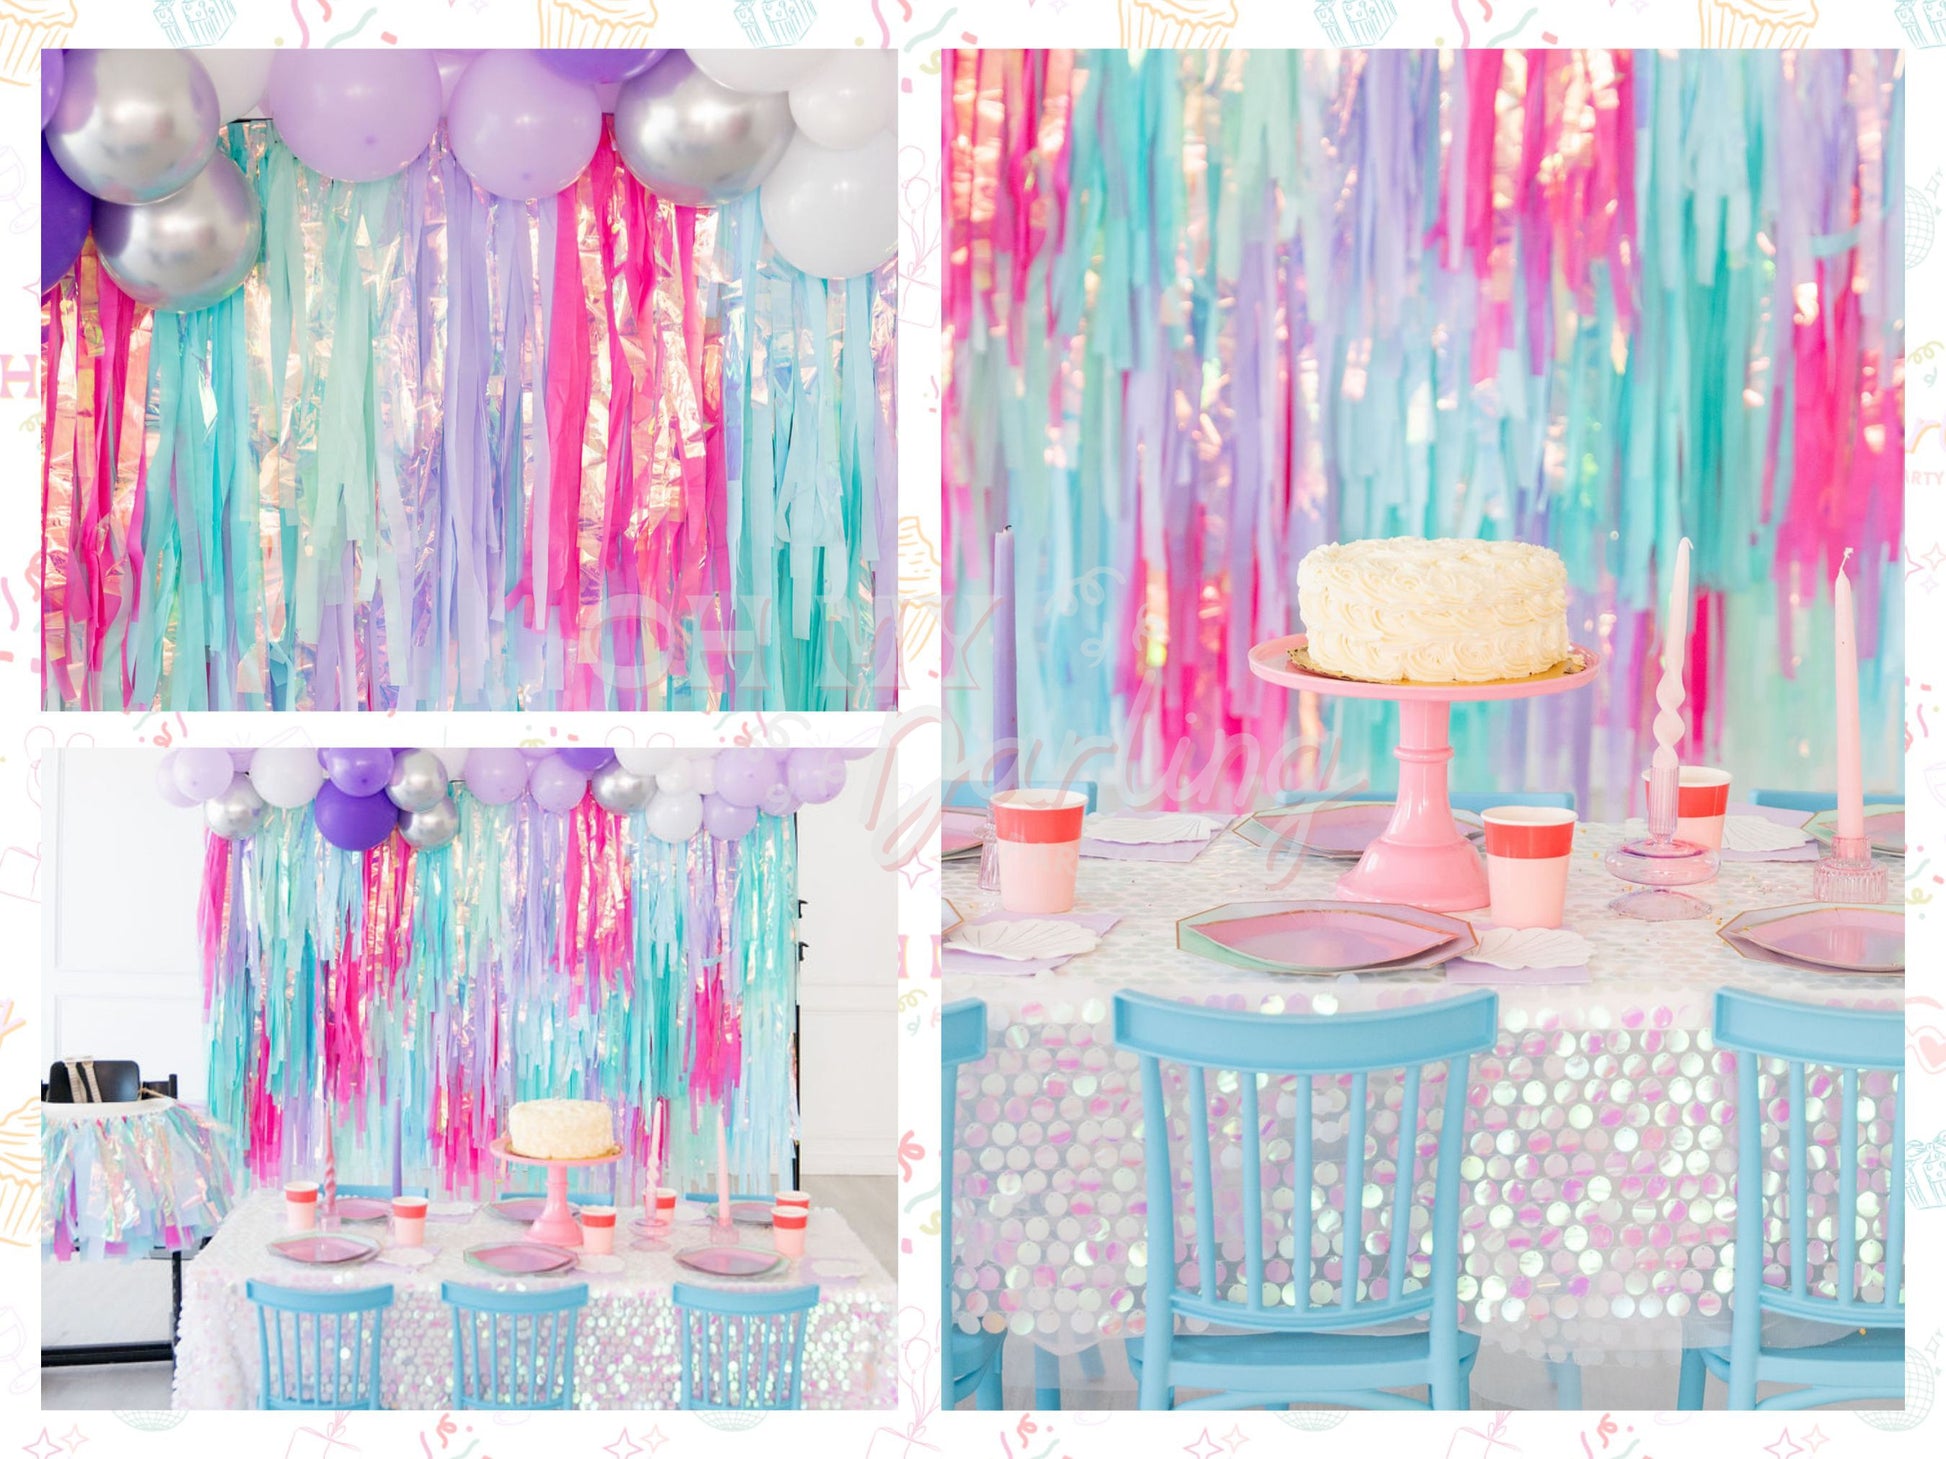 Mermaid Shellebrate Fringe Backdrop-Fringe Backdrop-Party Decor-Oh My Darling Party Co-Oh My Darling Party Co-backdrops for party, balloon garlands, be mine, be my valentine, beach, Beach House, bermuda, blue, BLUE BACKDROP, BLUE BACKDROPS, blue party, butterfly, candy pink, default, donuts, fringe garland, Fringe Streamers, girl party, iridescent, last splash, lavender, lavender birthday, light blue, mermaid, mermaid party, mermaids, metalic silver, metallic iridescent, metallic silver, mint, ocean, OMDPC,